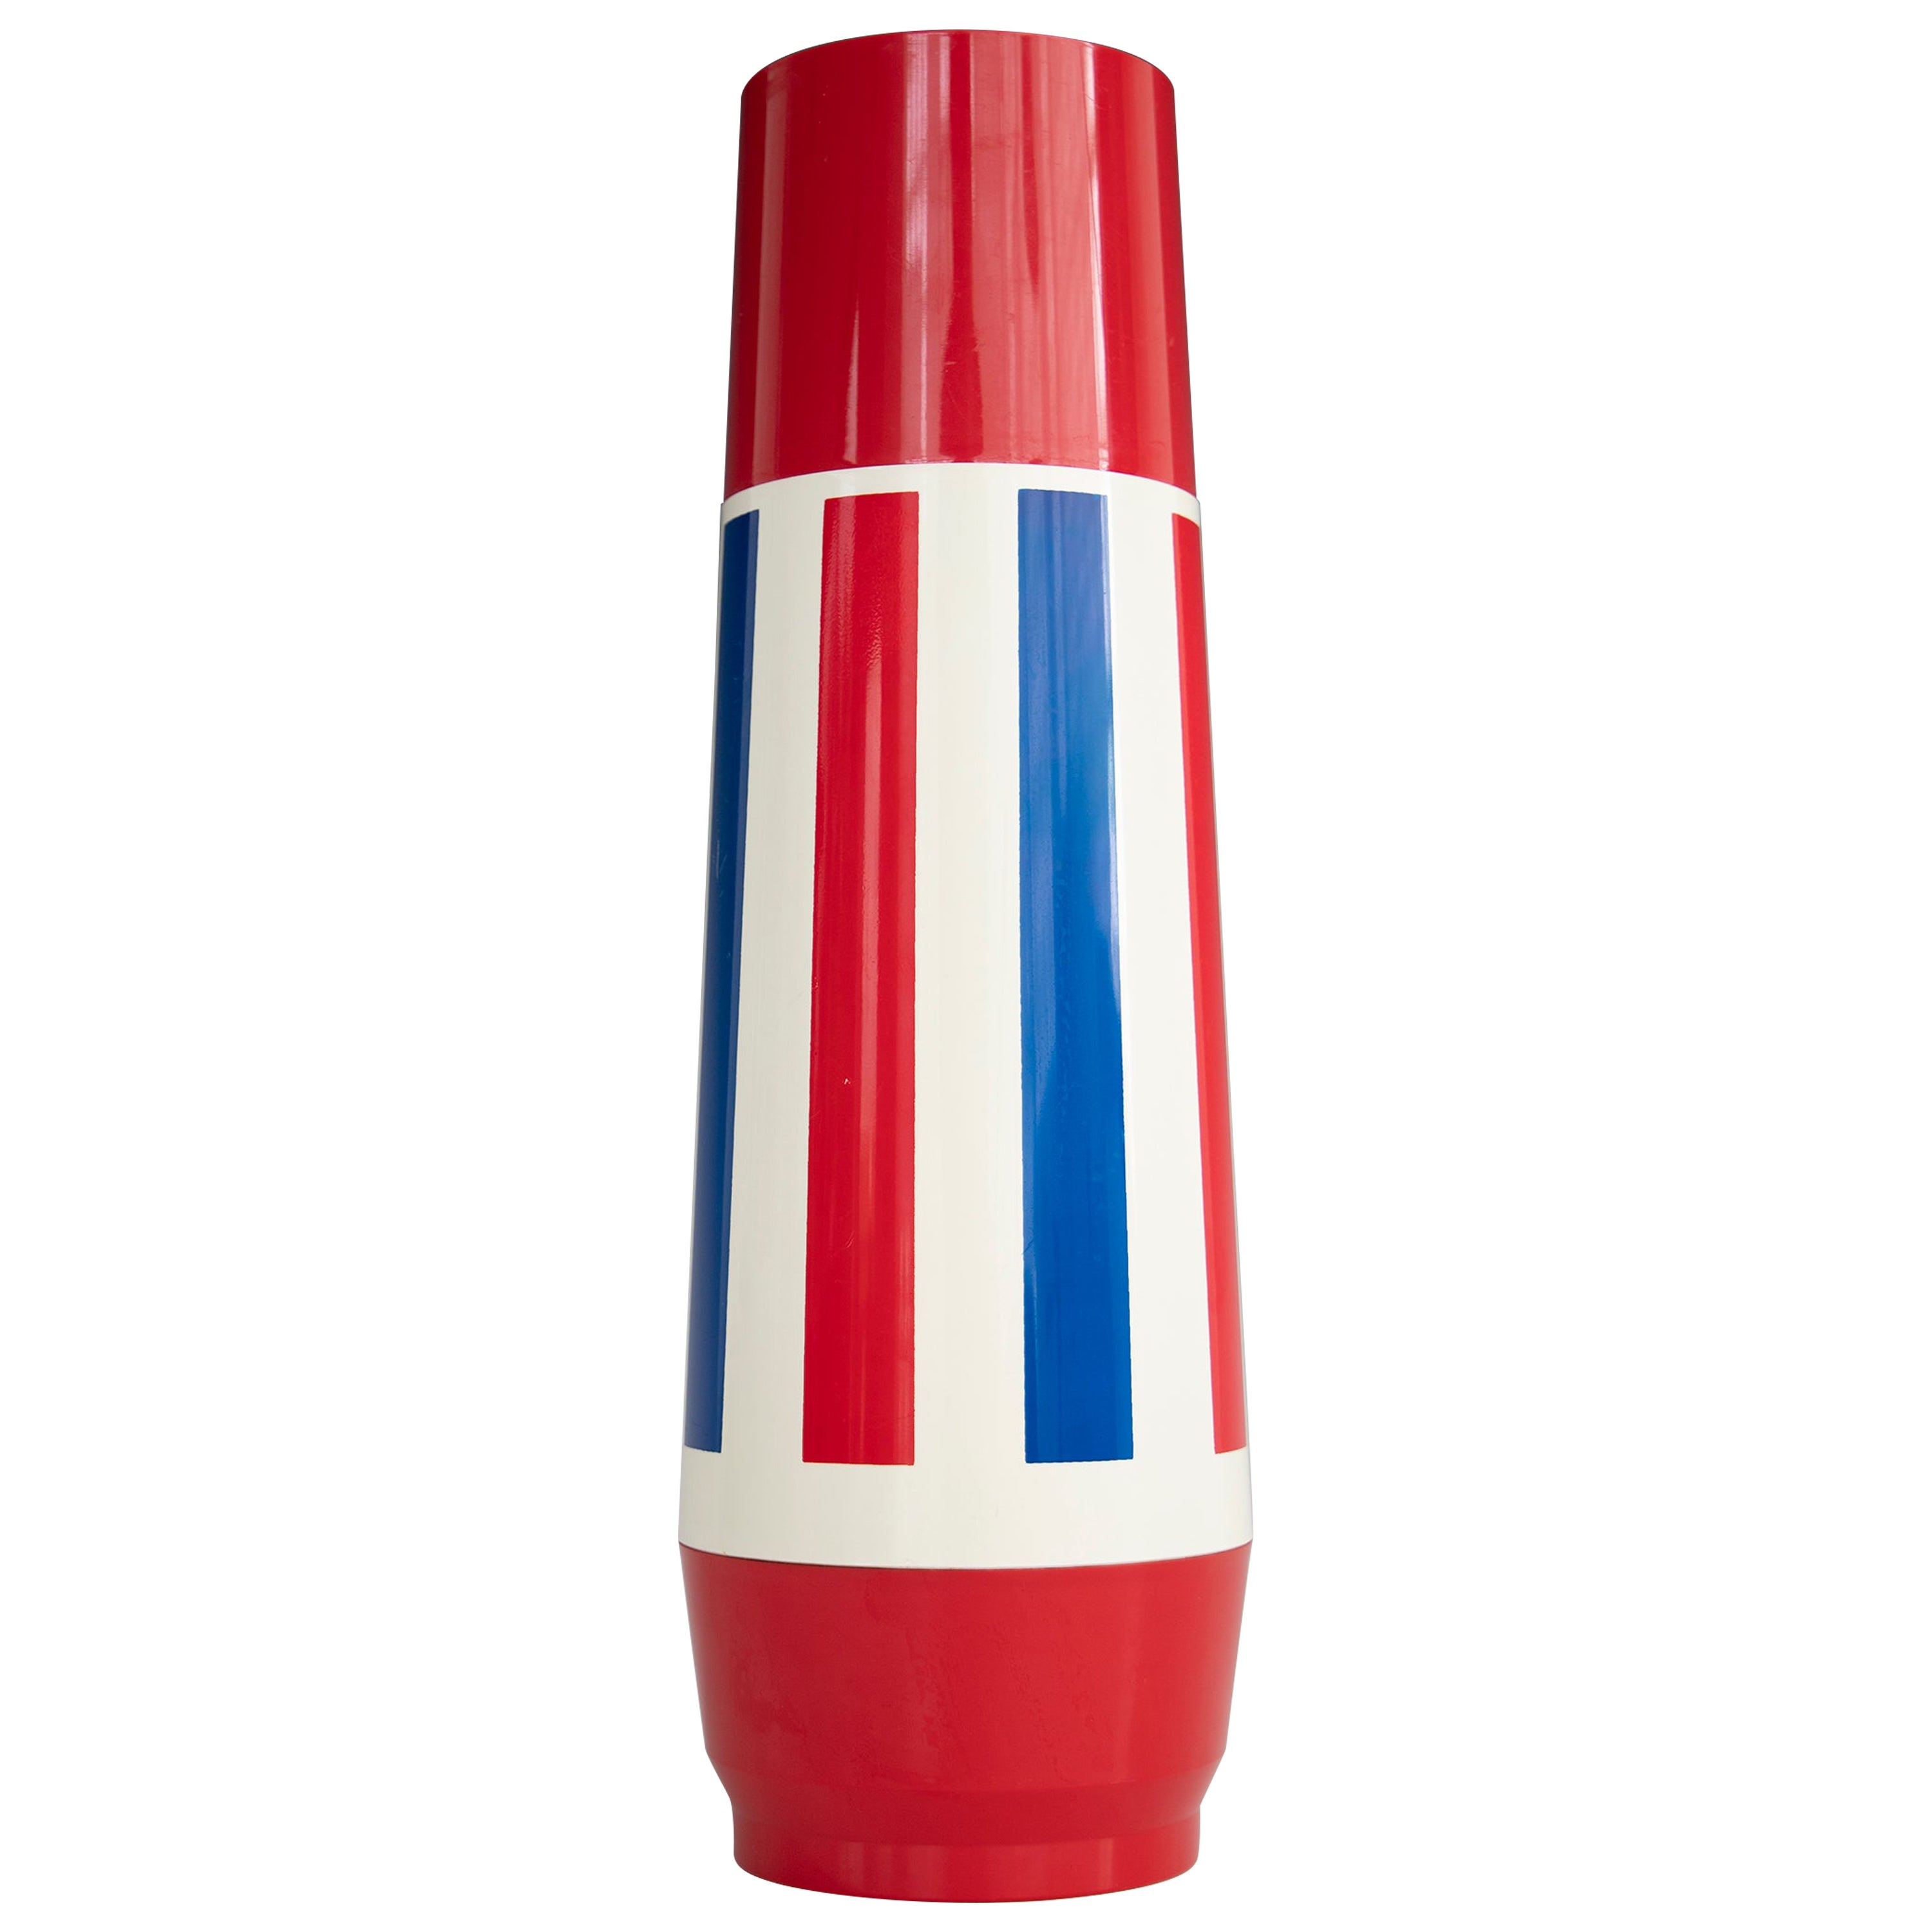 Red White and Blue Rocket Shape Thermo-Serv Thermos For Sale